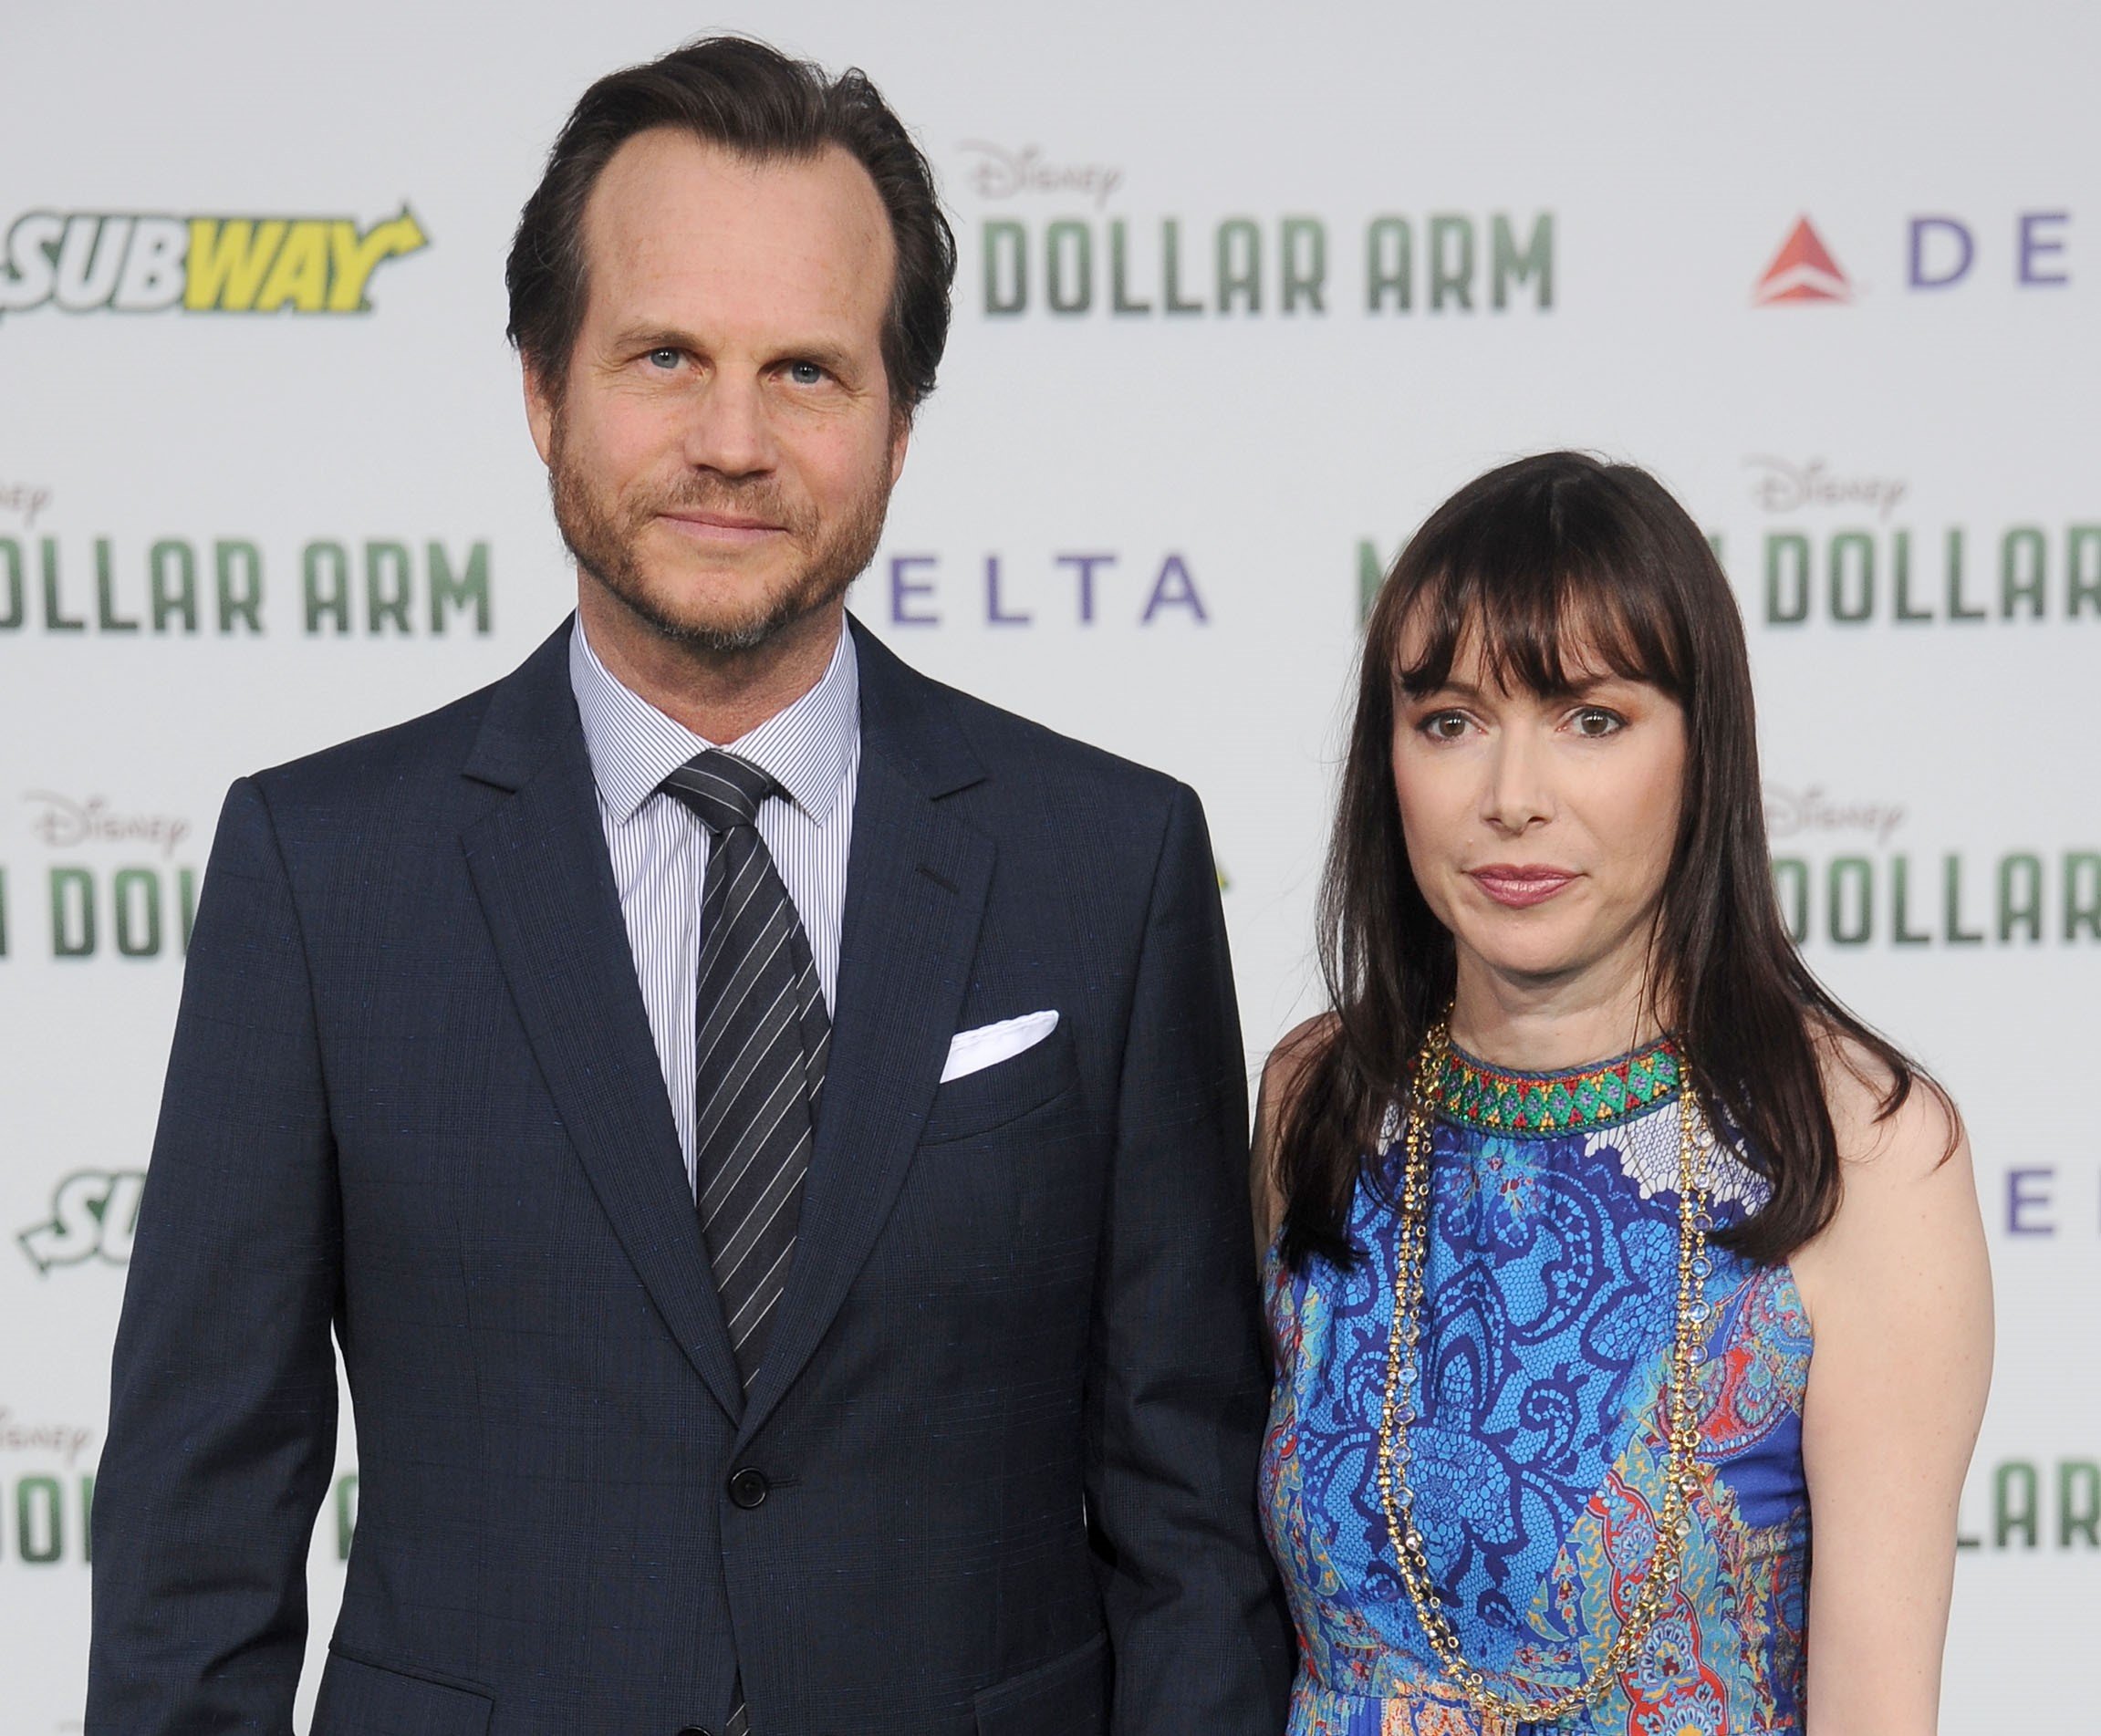 Bill Paxton and wife Louise Newbury at the Los Angeles premiere of "Million Dollar Arm"in 2014, in Hollywood, California. | Source: Getty Images